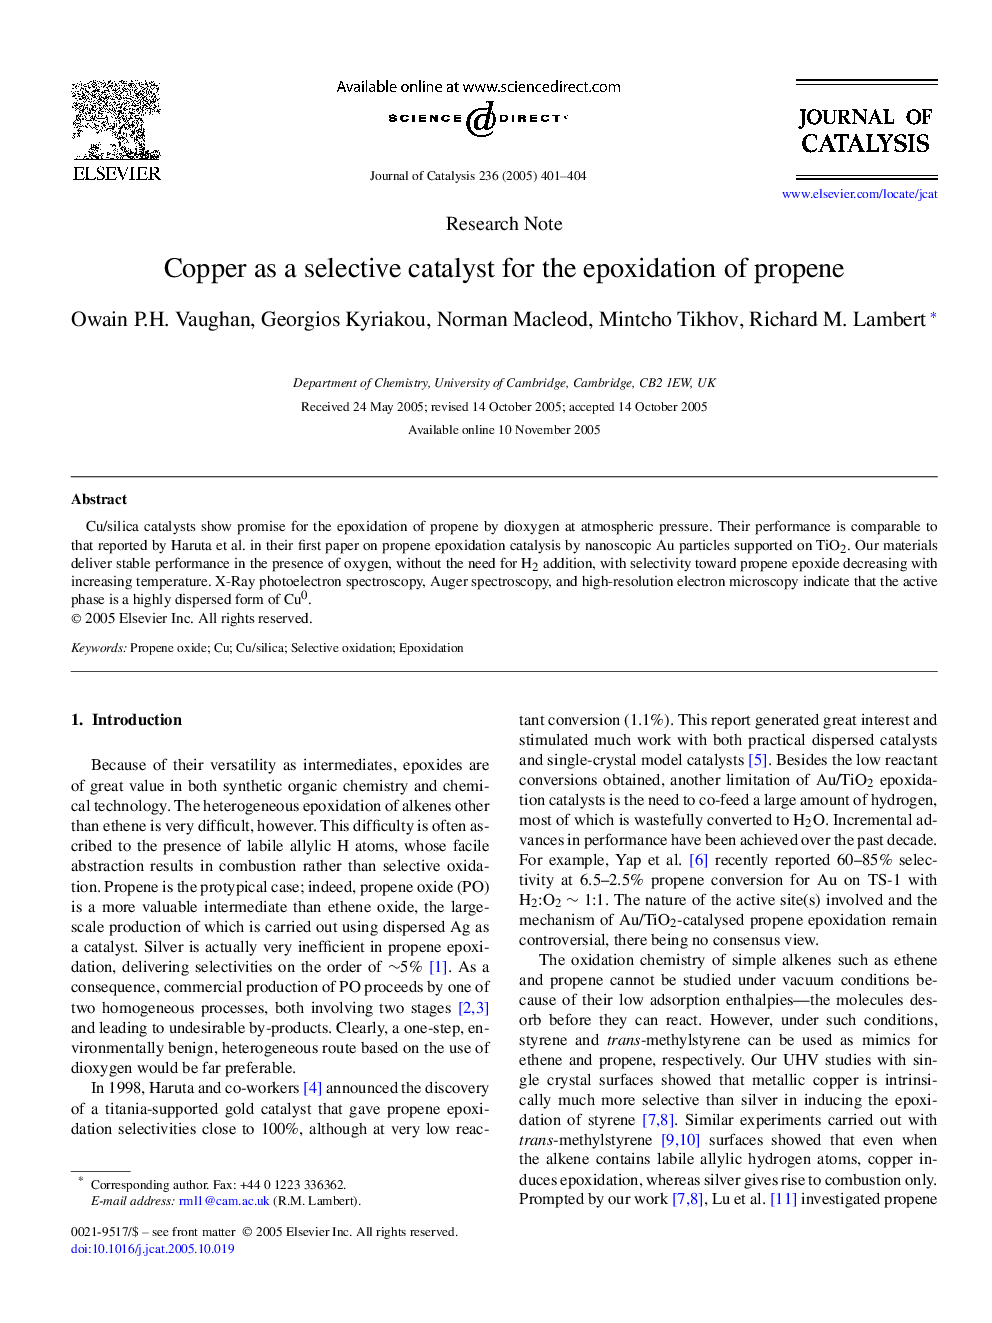 Copper as a selective catalyst for the epoxidation of propene